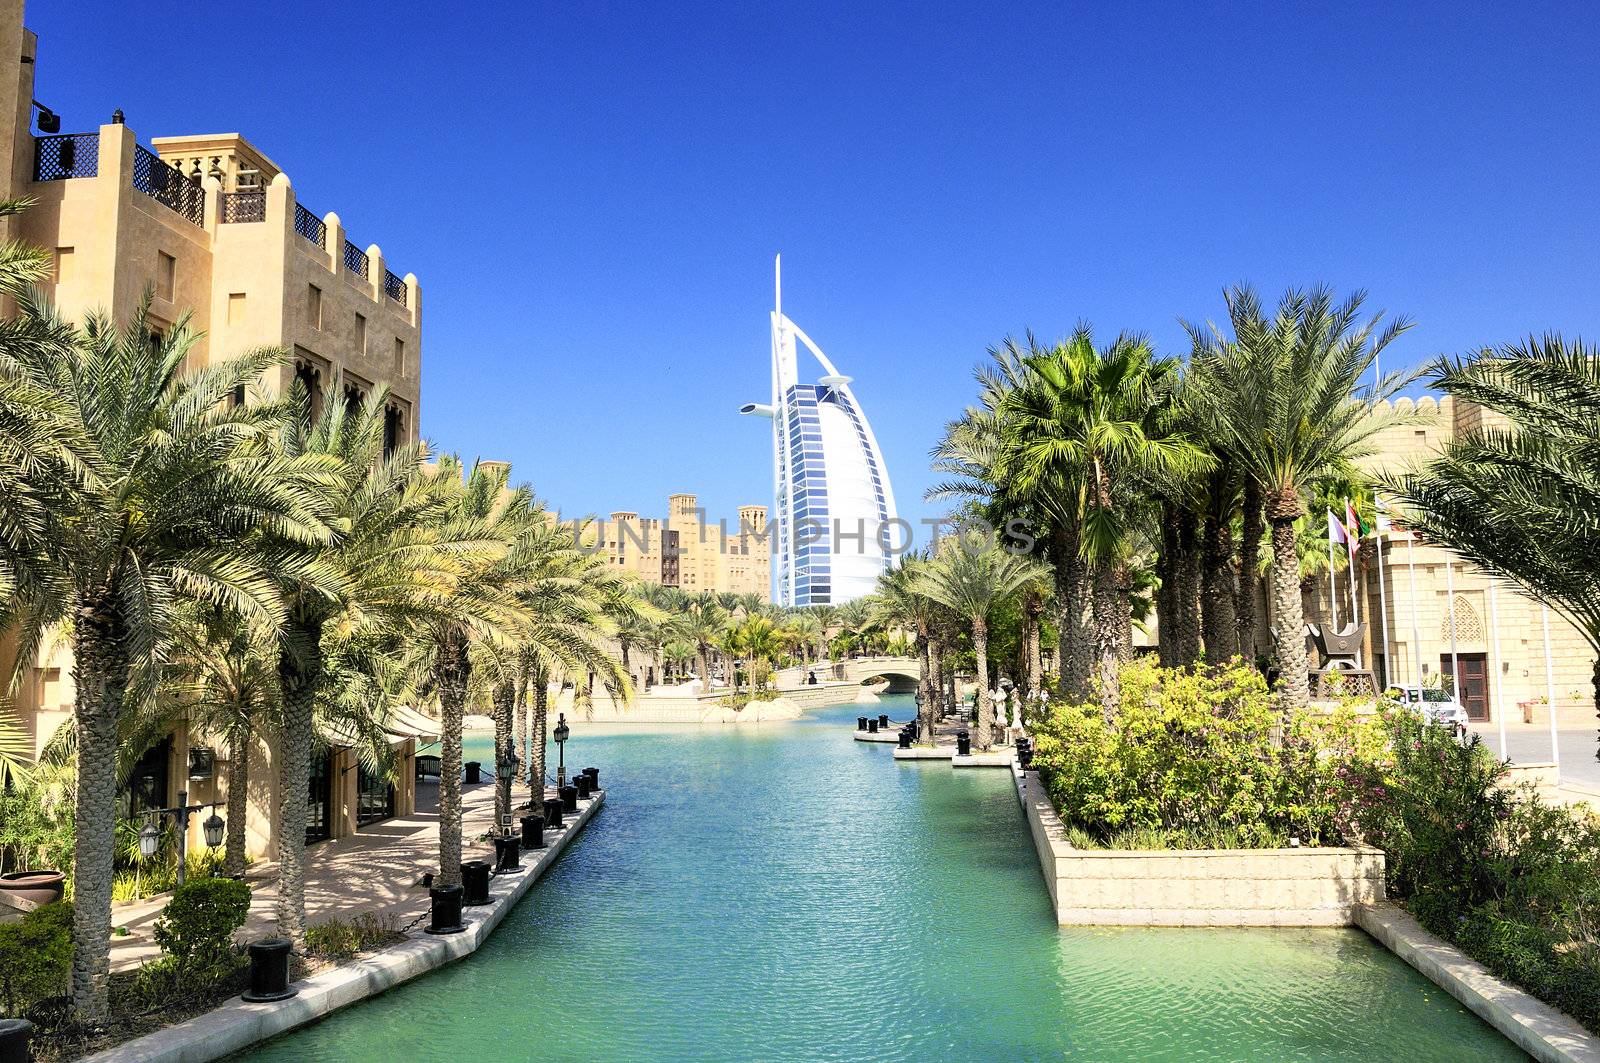 View at hotel Burj al Arab from Madinat Jumeirah in Dubai. Madinat Jumeirah encompasses two hotels and clusters of 29 traditional Arabic houses. United Arabe Emirates